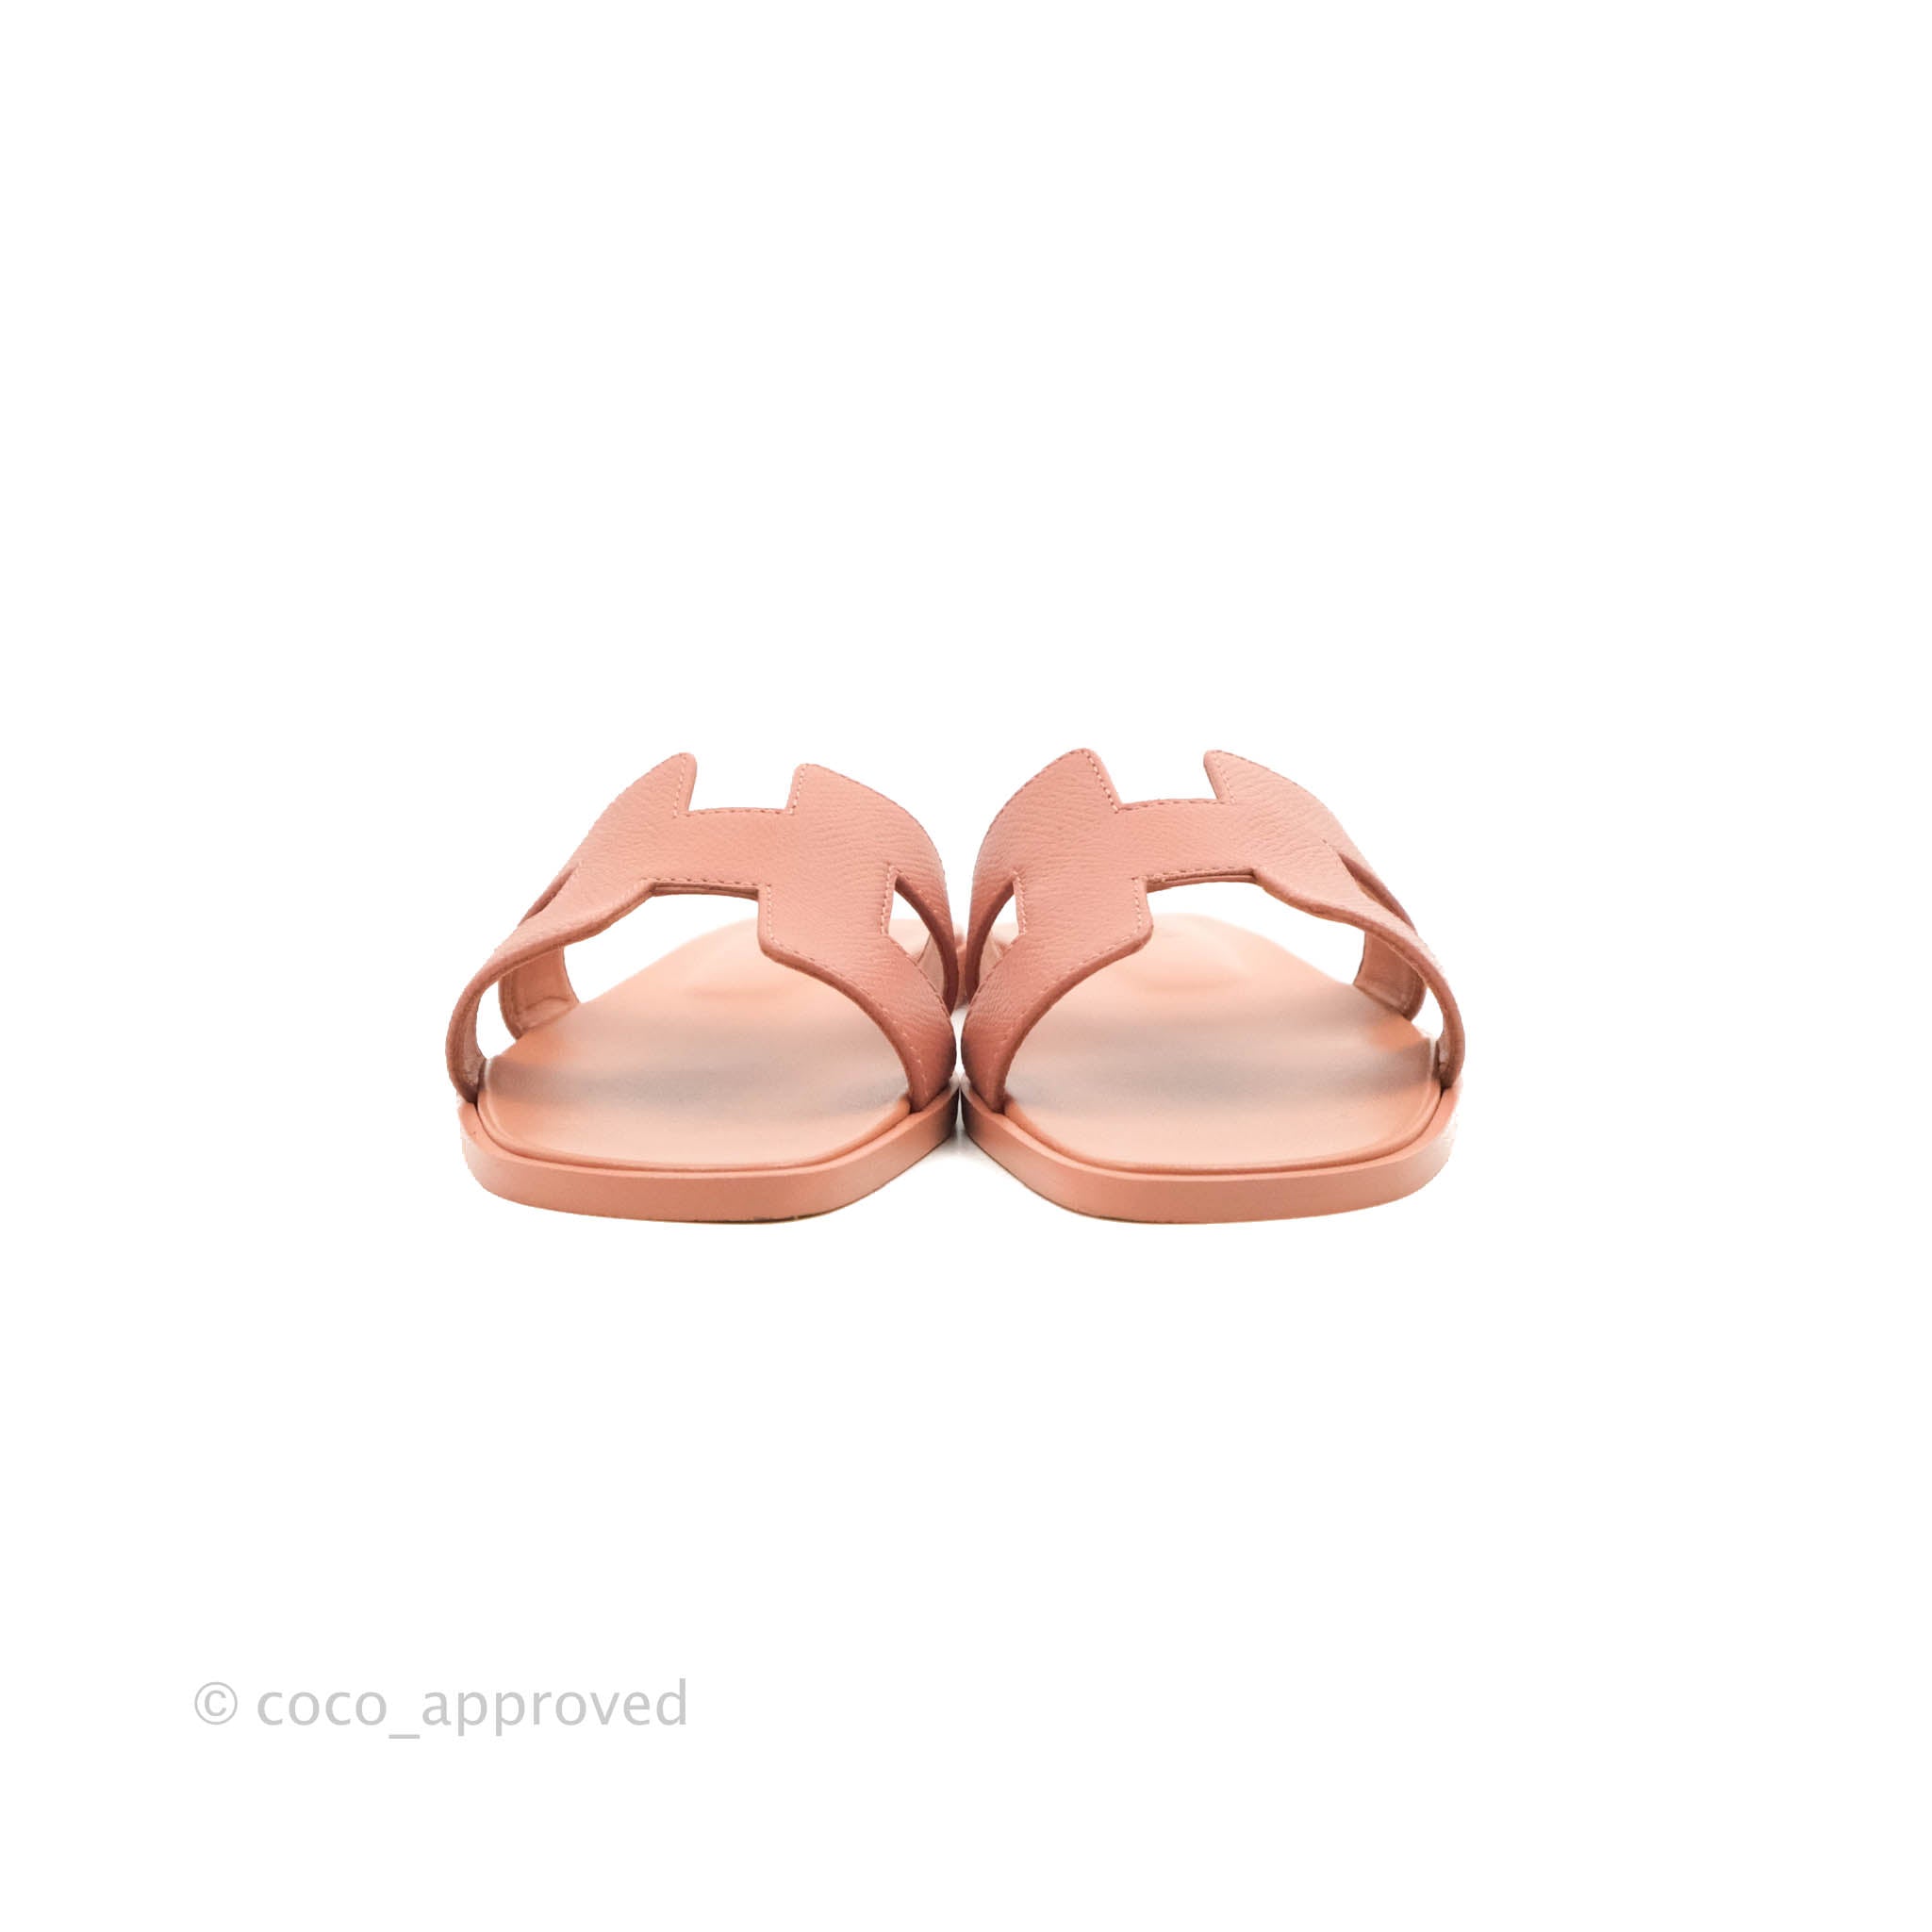 Hermes Oran Sandals in Rose Pale Epsom Leather Size 36